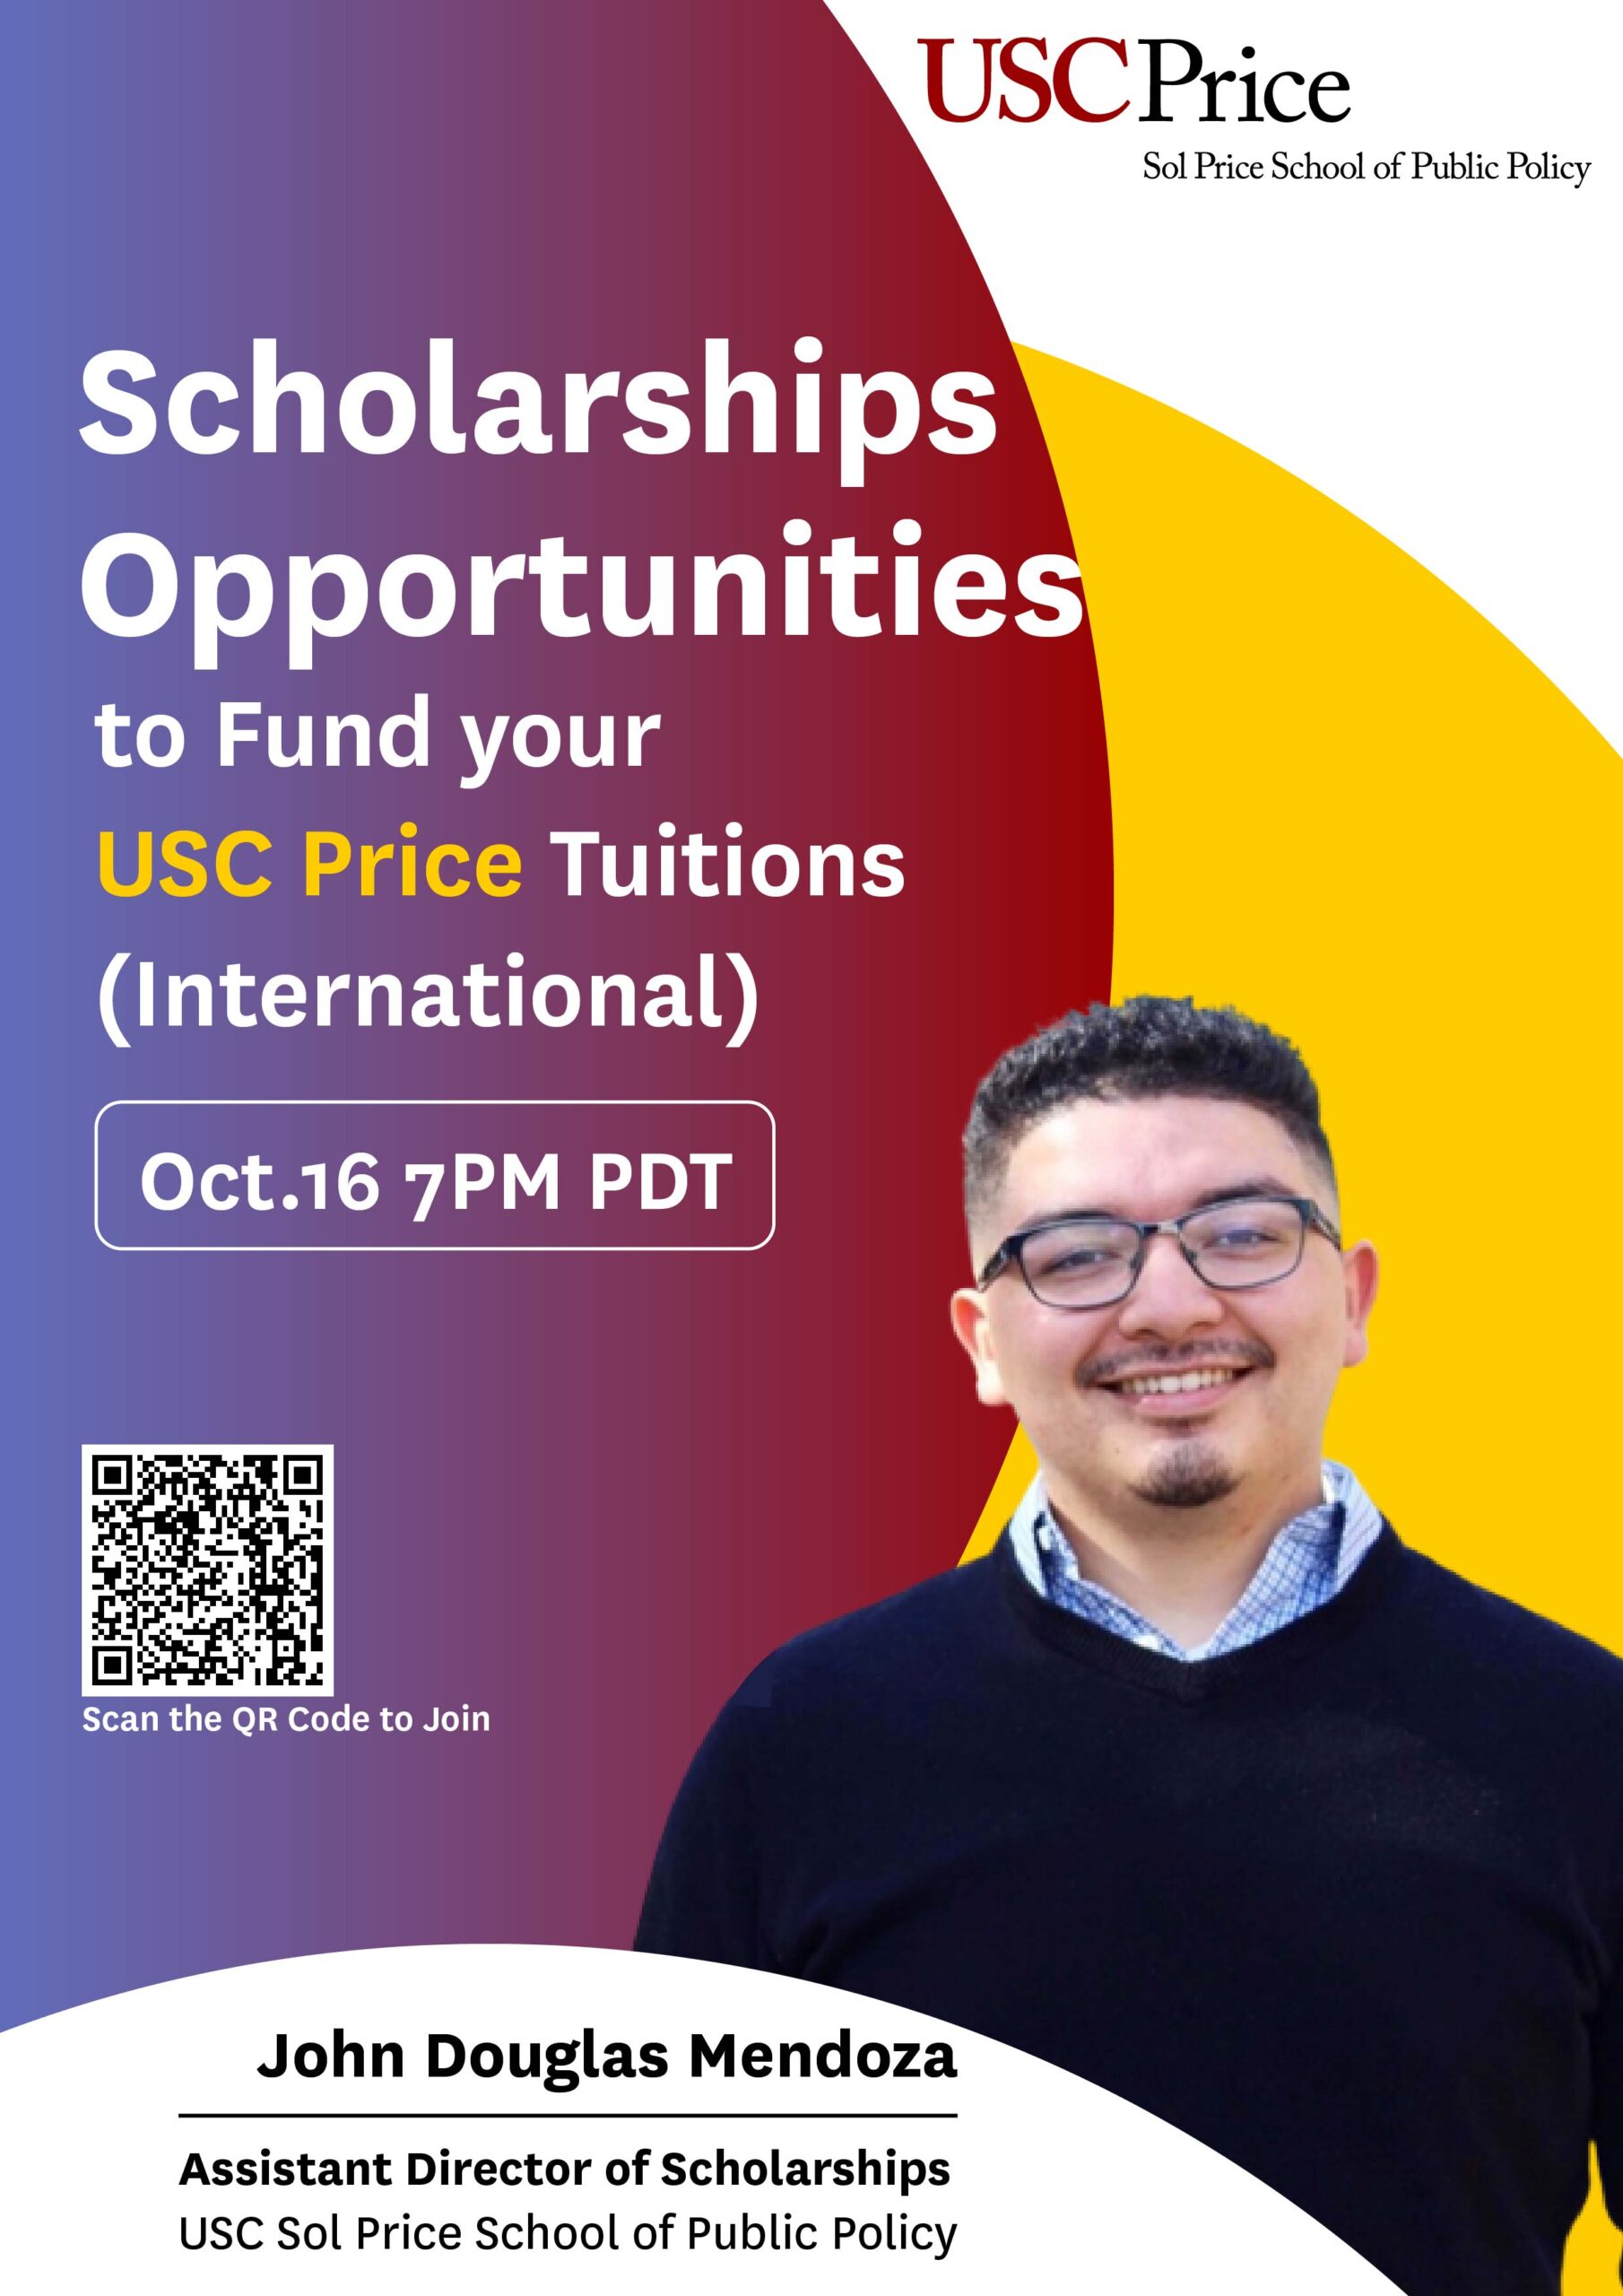 Scholarships Opportunities to Fund your USC Price Tuitions (International)